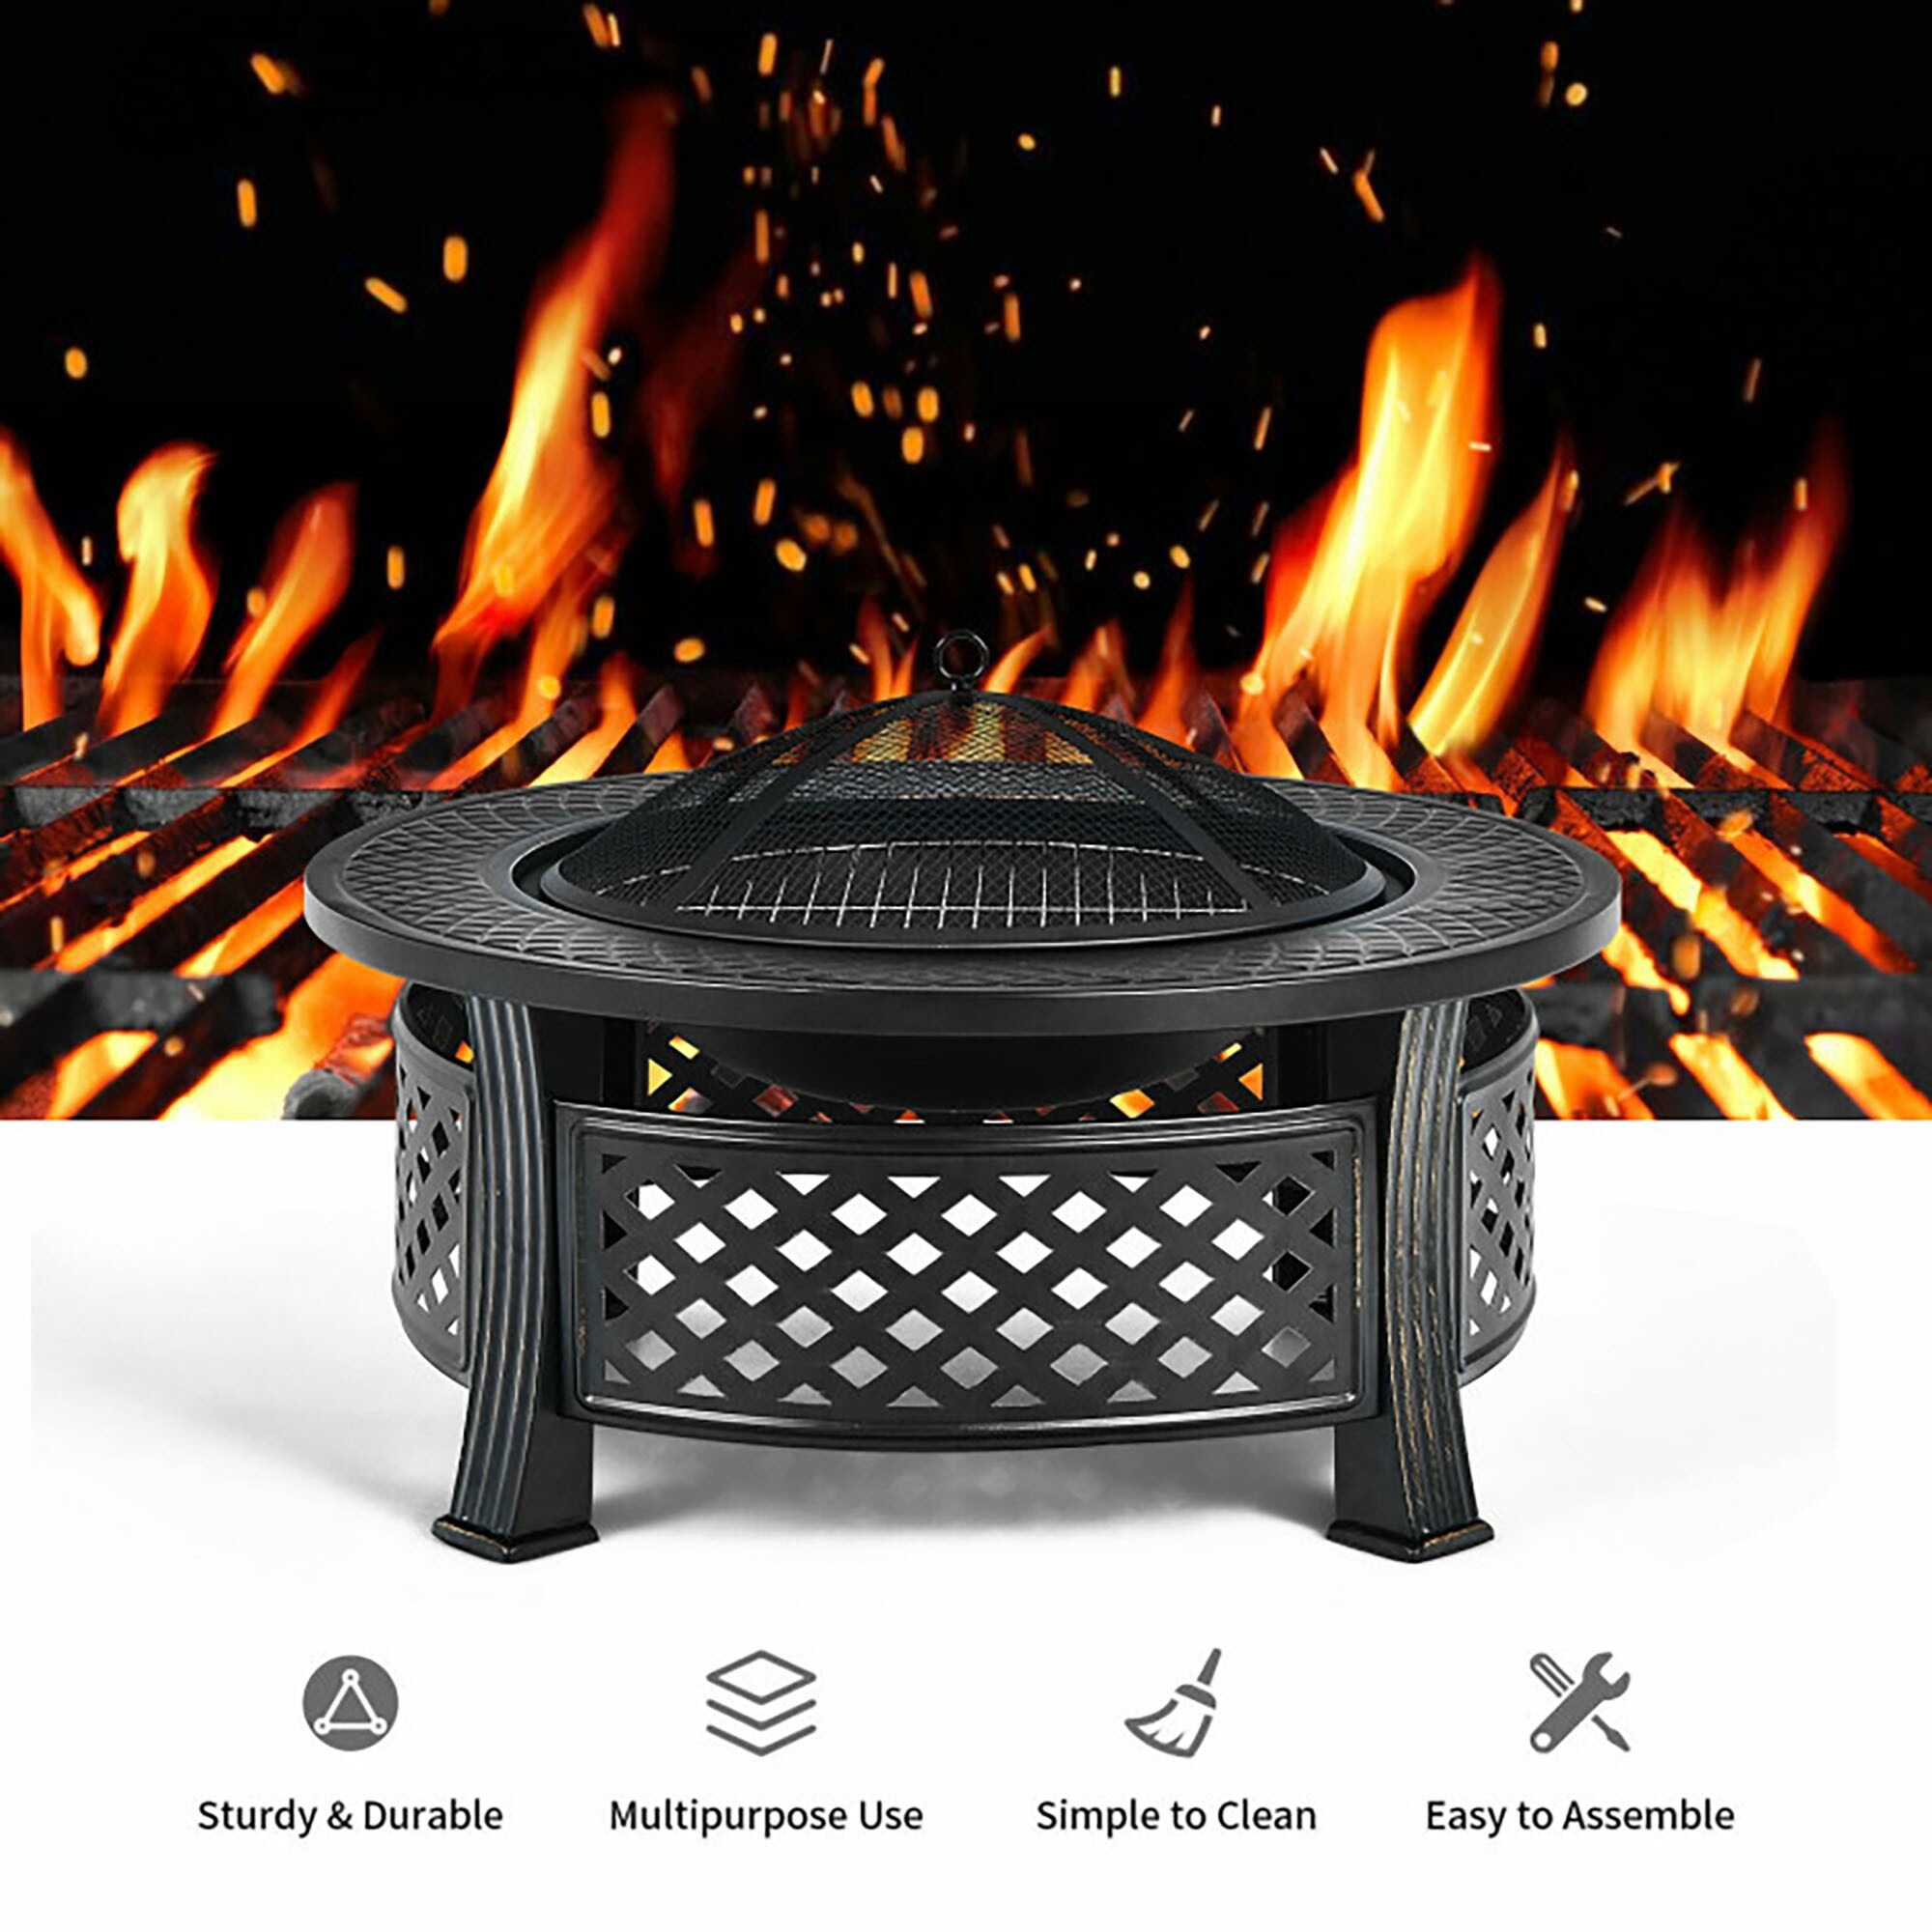 Are you in the market to purchase an 17 Cast Iron Campfire Griddle Barbour  International ? Purchase now, before they are gone